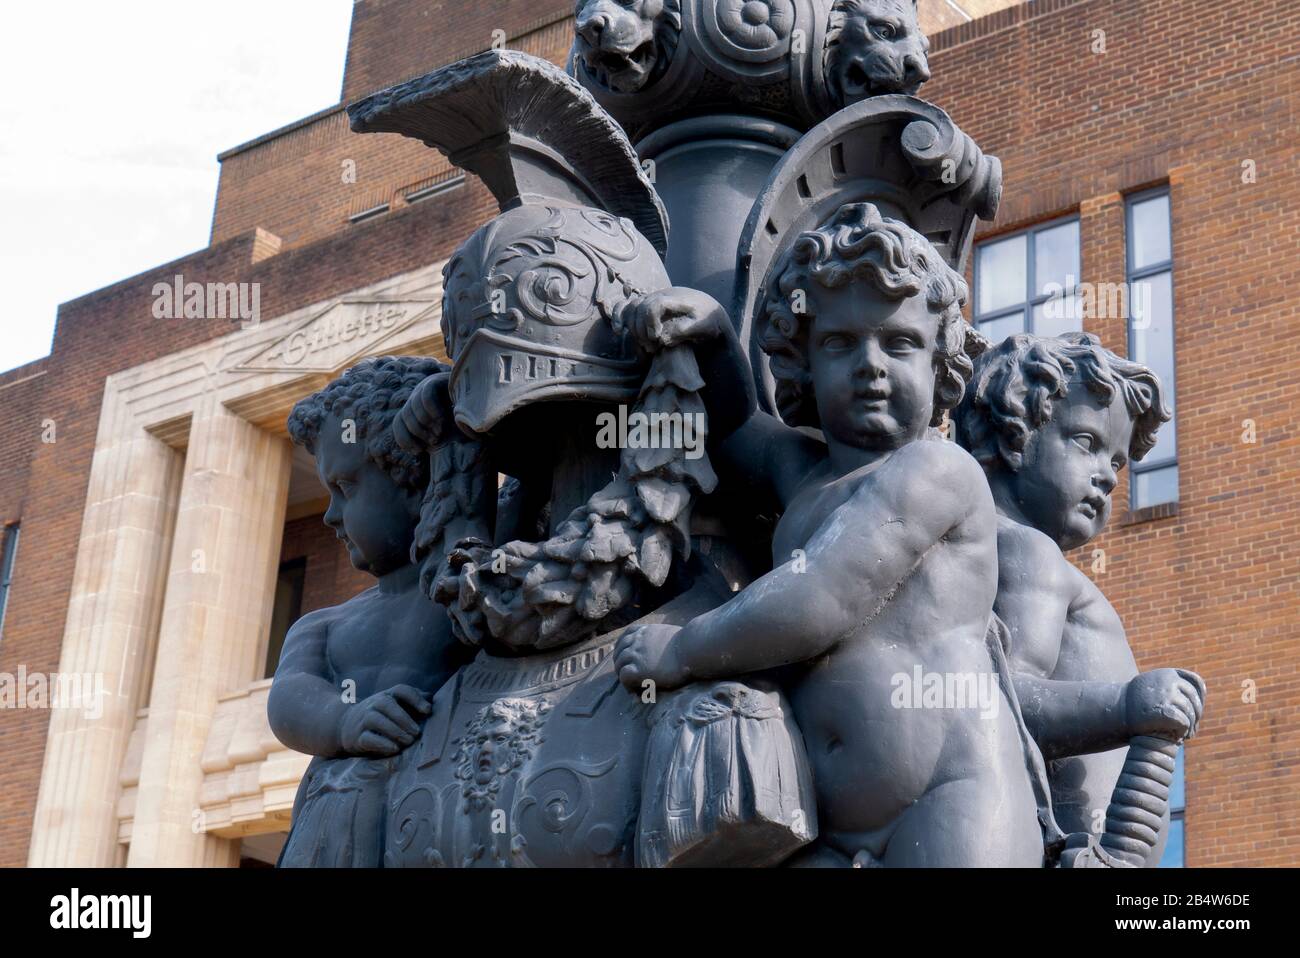 Cherubs on decorative lamp-post at the Gillette Building, Art Deco, Grade II listed structure on Great West Road, Brentford, London, United Kingdom Stock Photo